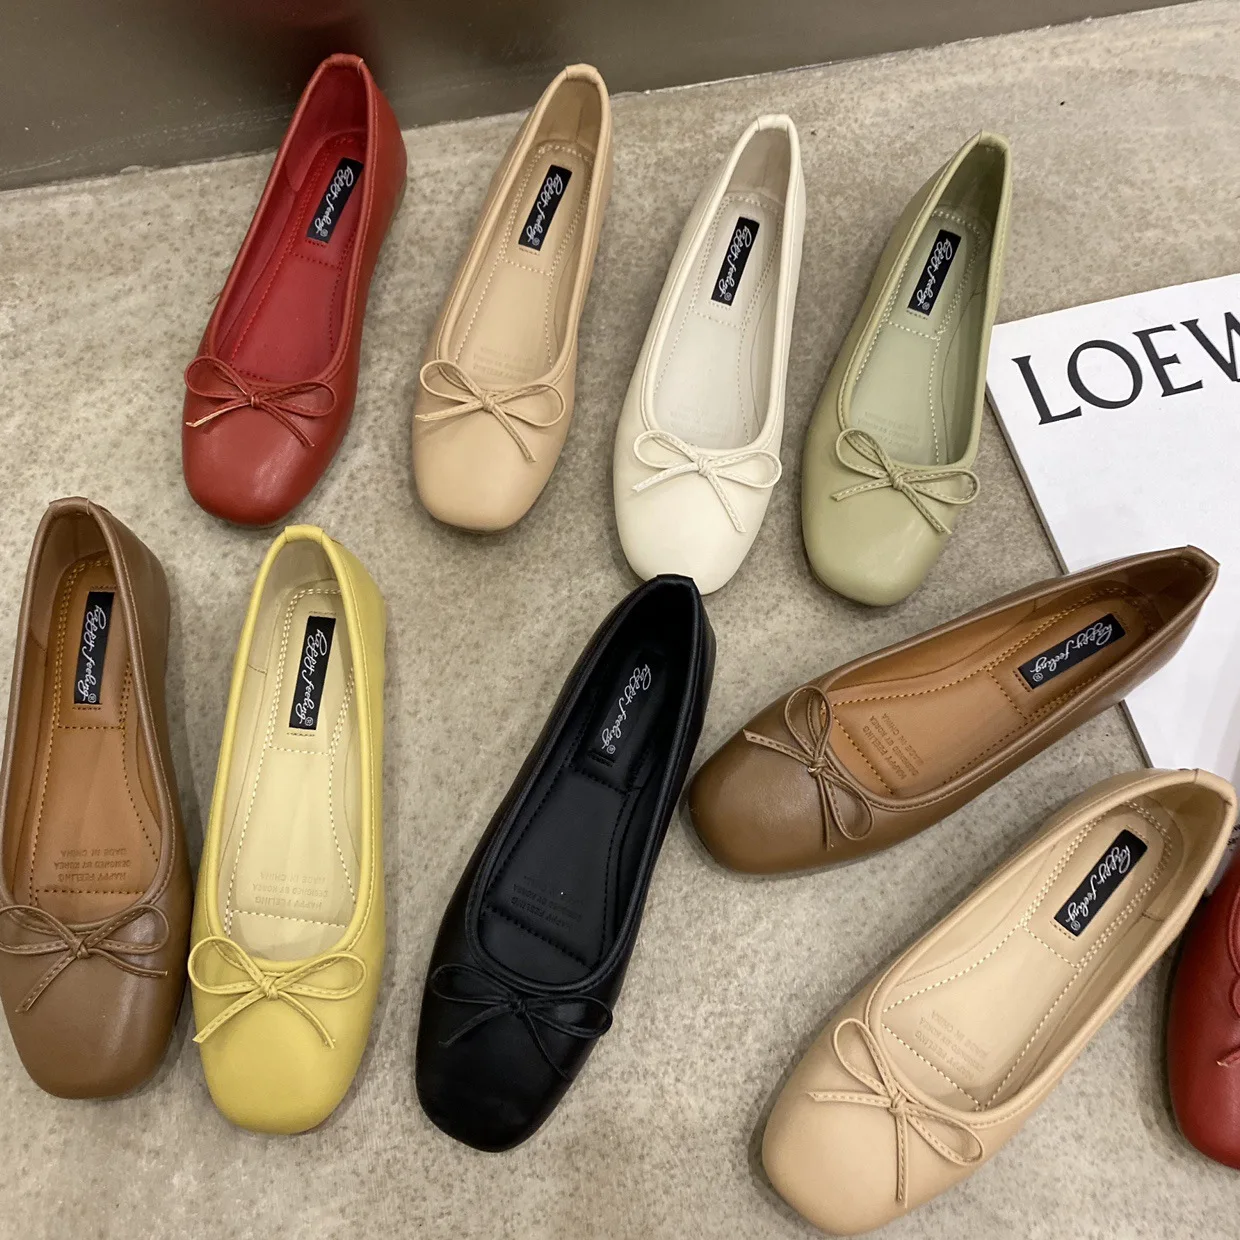 

Classic Female Flats Ballerina Shoes Women Fashion Brand Round Toe Ballet Bow Knot Shallow Moccasin Slip On Loafer Big size Muje